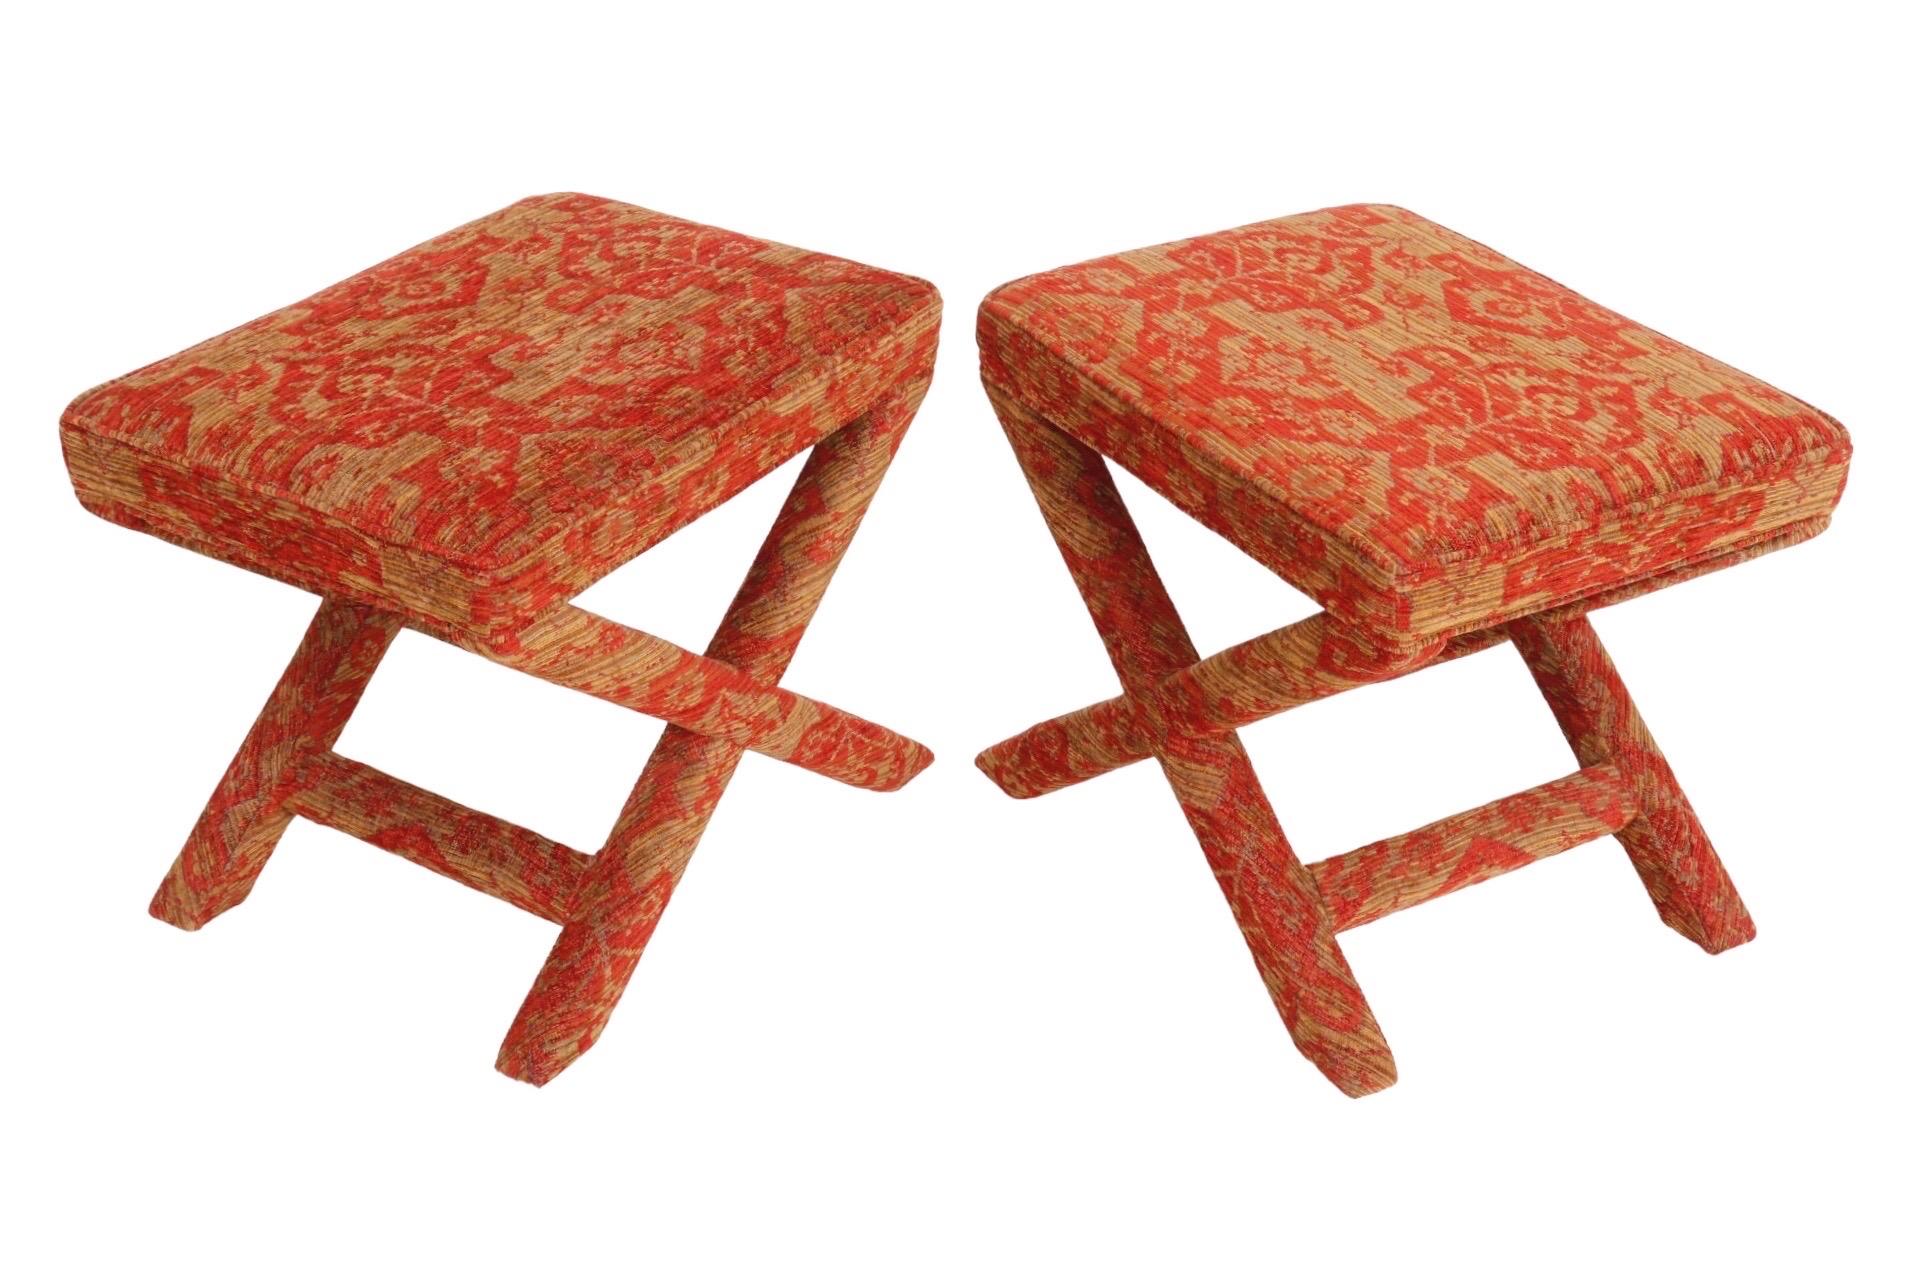 A pair of upholstered ottomans made by Sherrill Furniture, in the style of Billy Baldwin’s iconic X-base ottoman. Rectangular bench ottomans with x shaped legs supported with stretchers are covered throughout in a bold red and gold tapestry jacquard